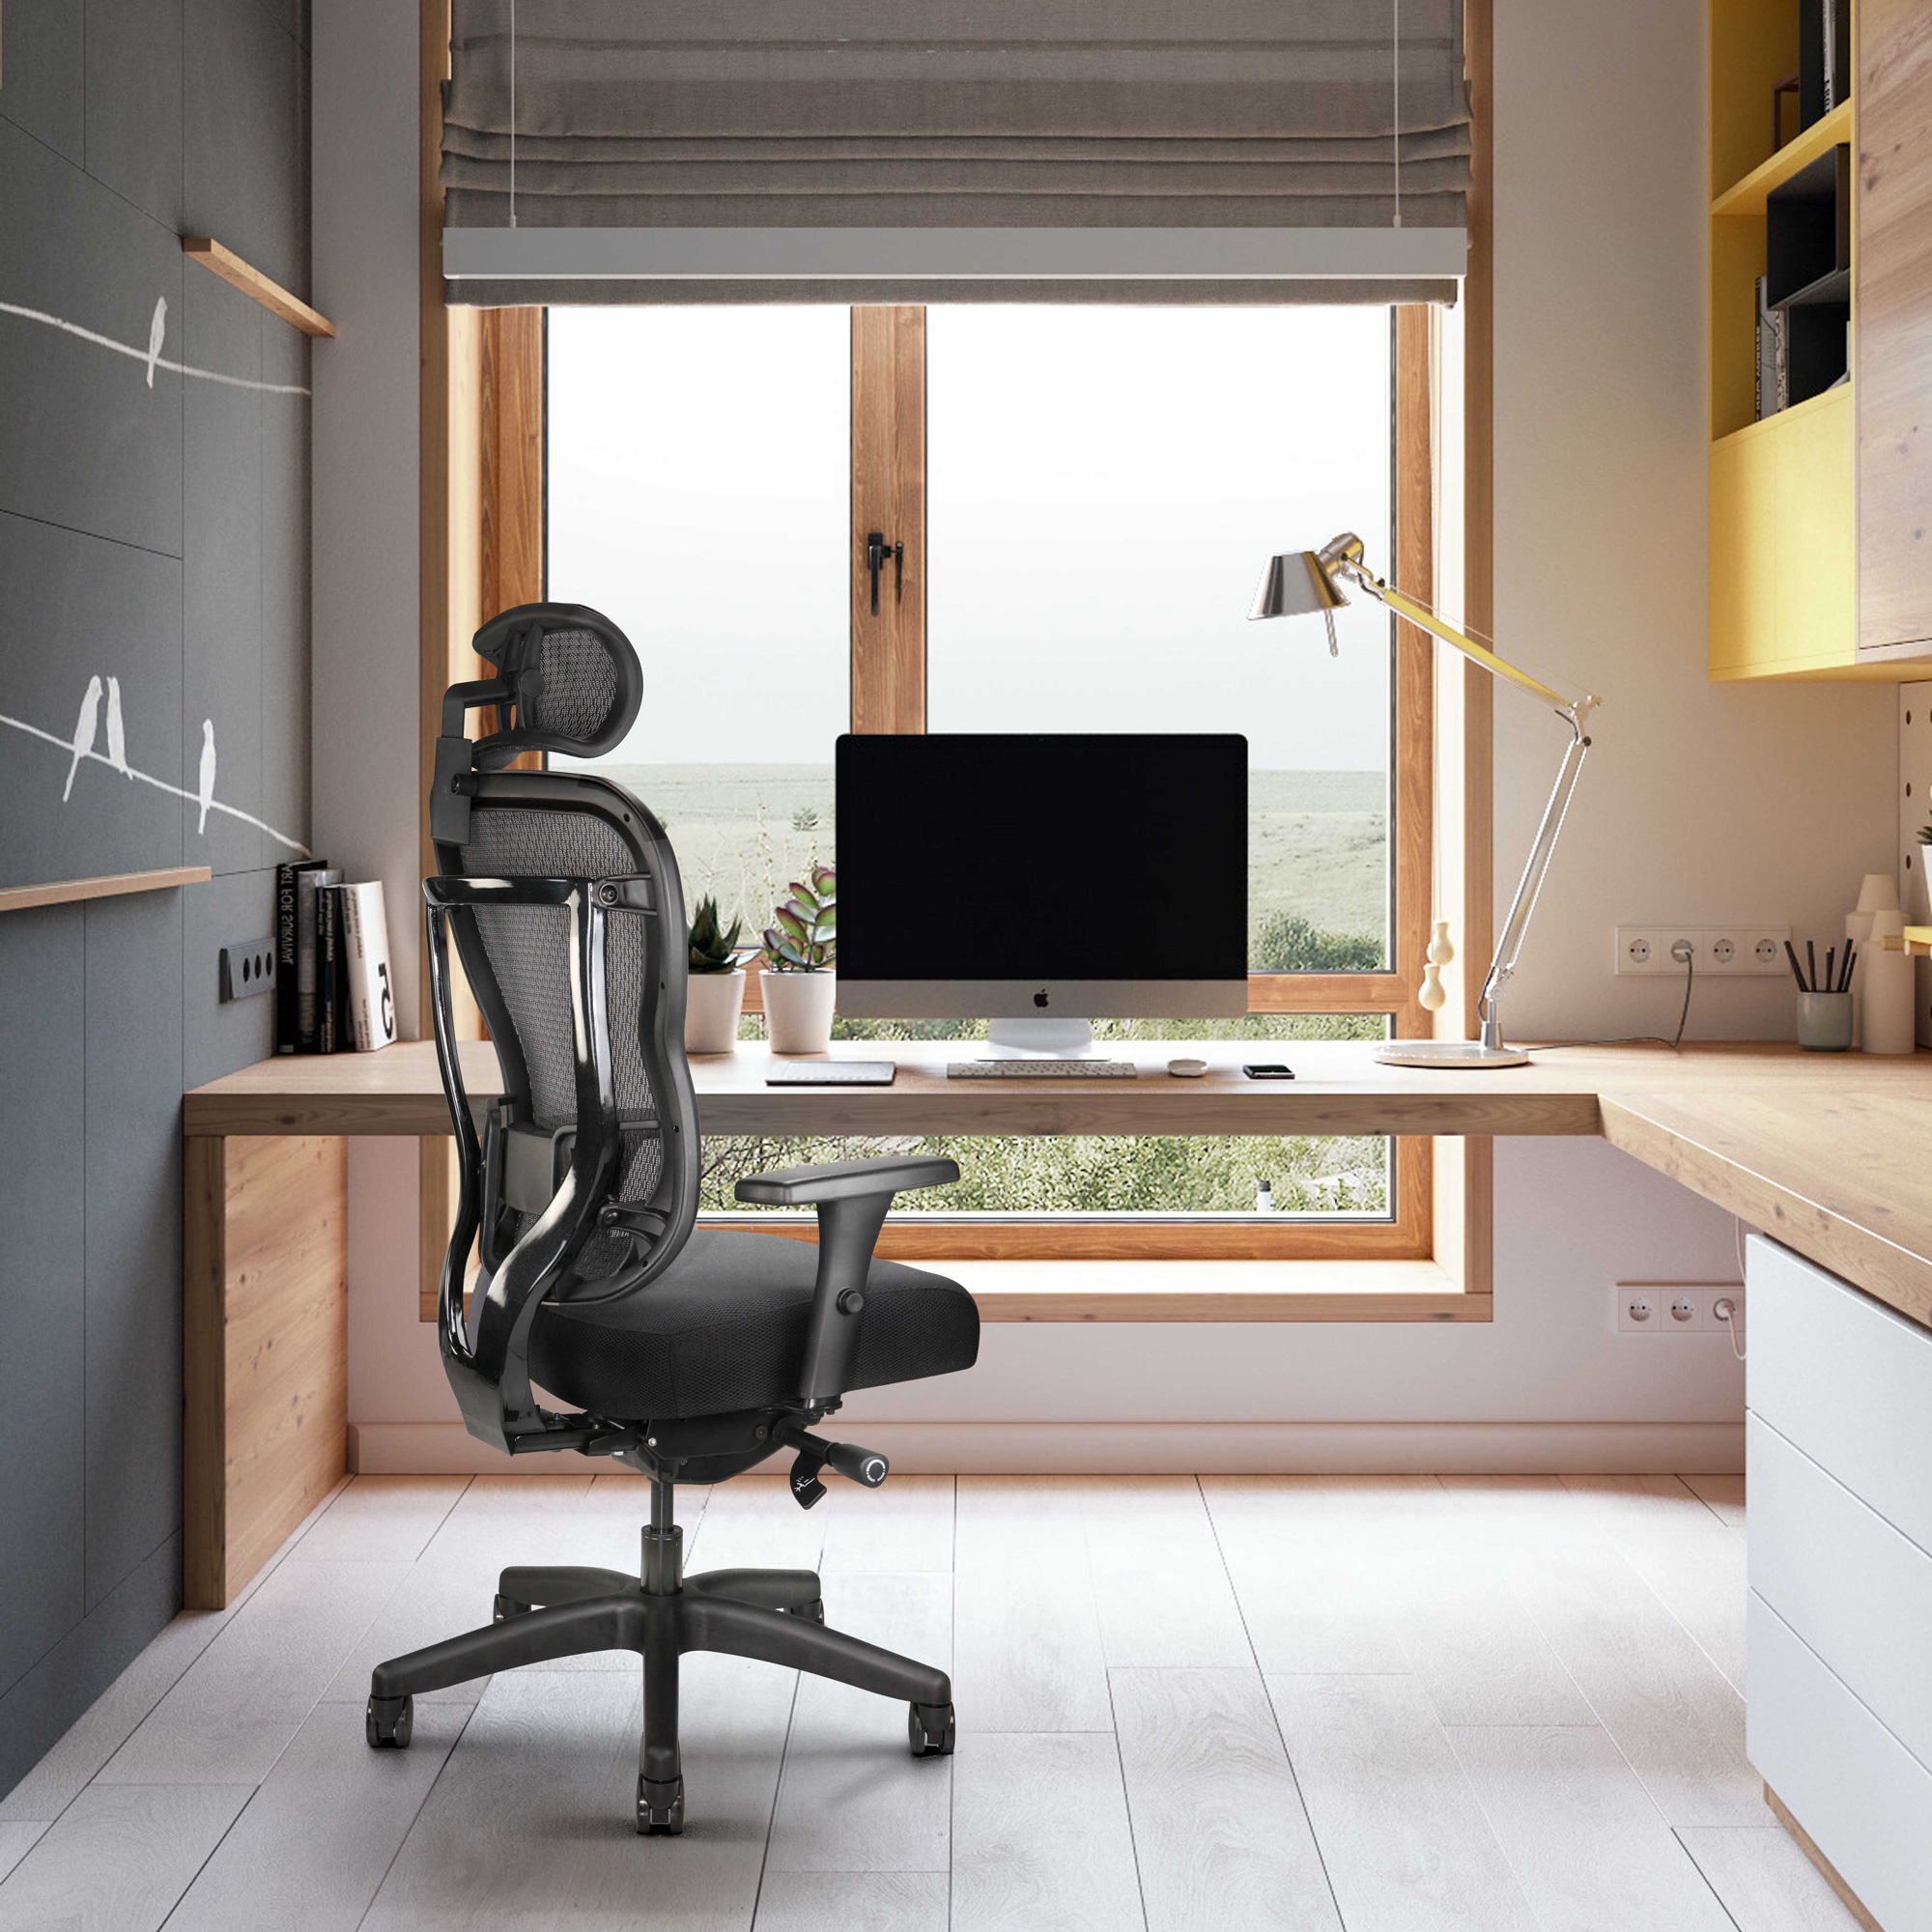 Rika Task Chair for home office